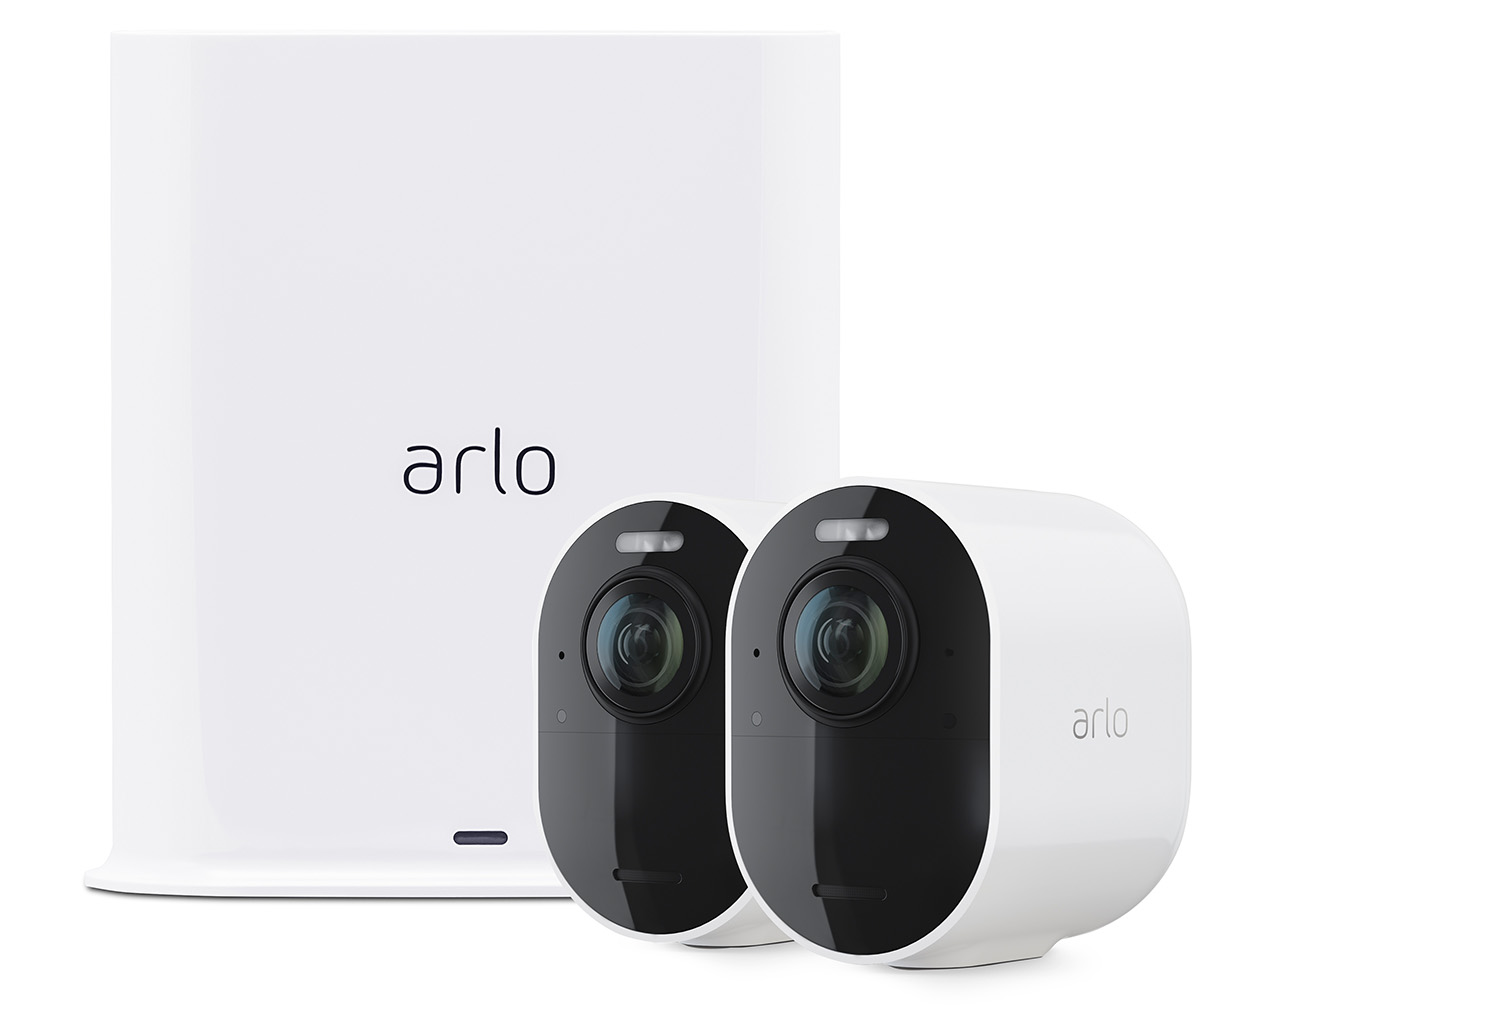 Arlo announces its newest security camera